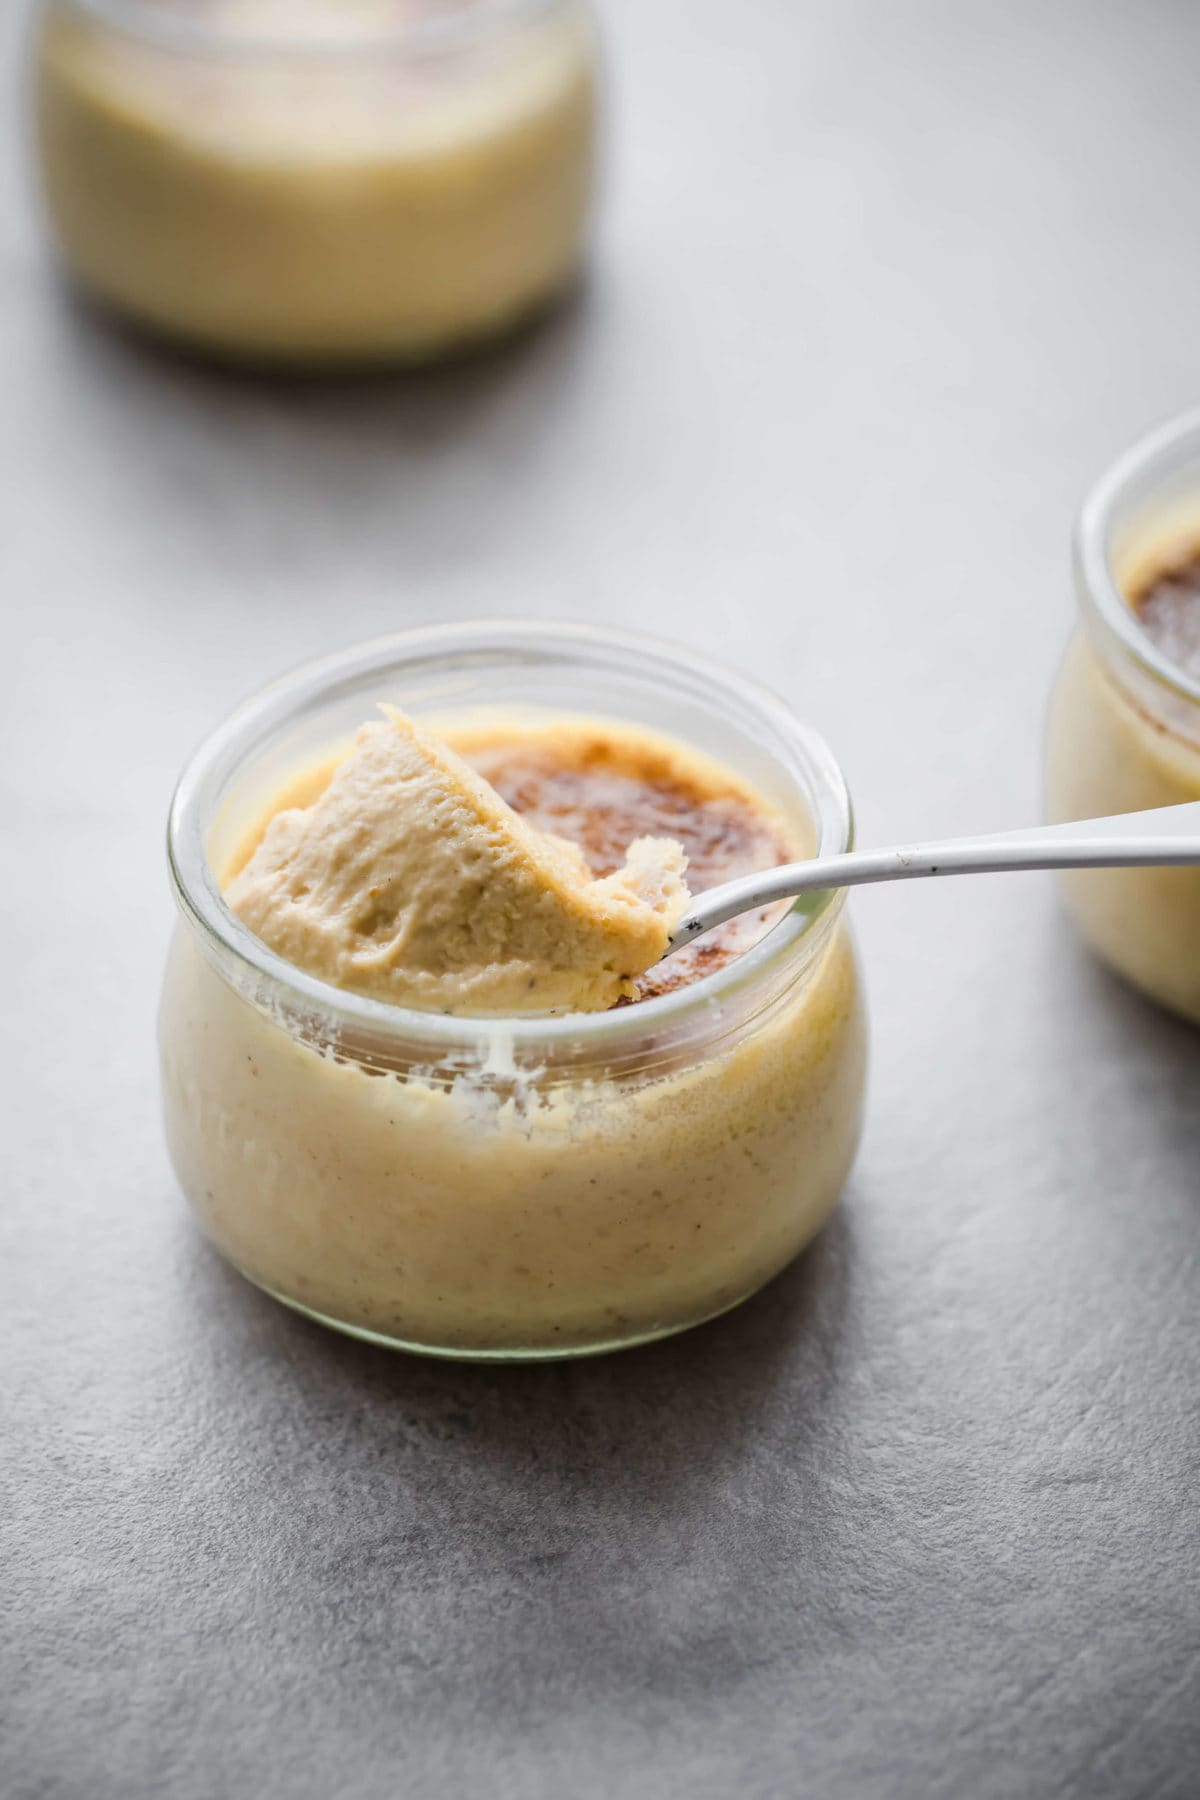 Keto Pumpkin Spice Creme BrÃ»lÃ©e has a rich and creamy texture inside and a delightfully crunchy top. It's the perfect year round low carb dessert recipe.